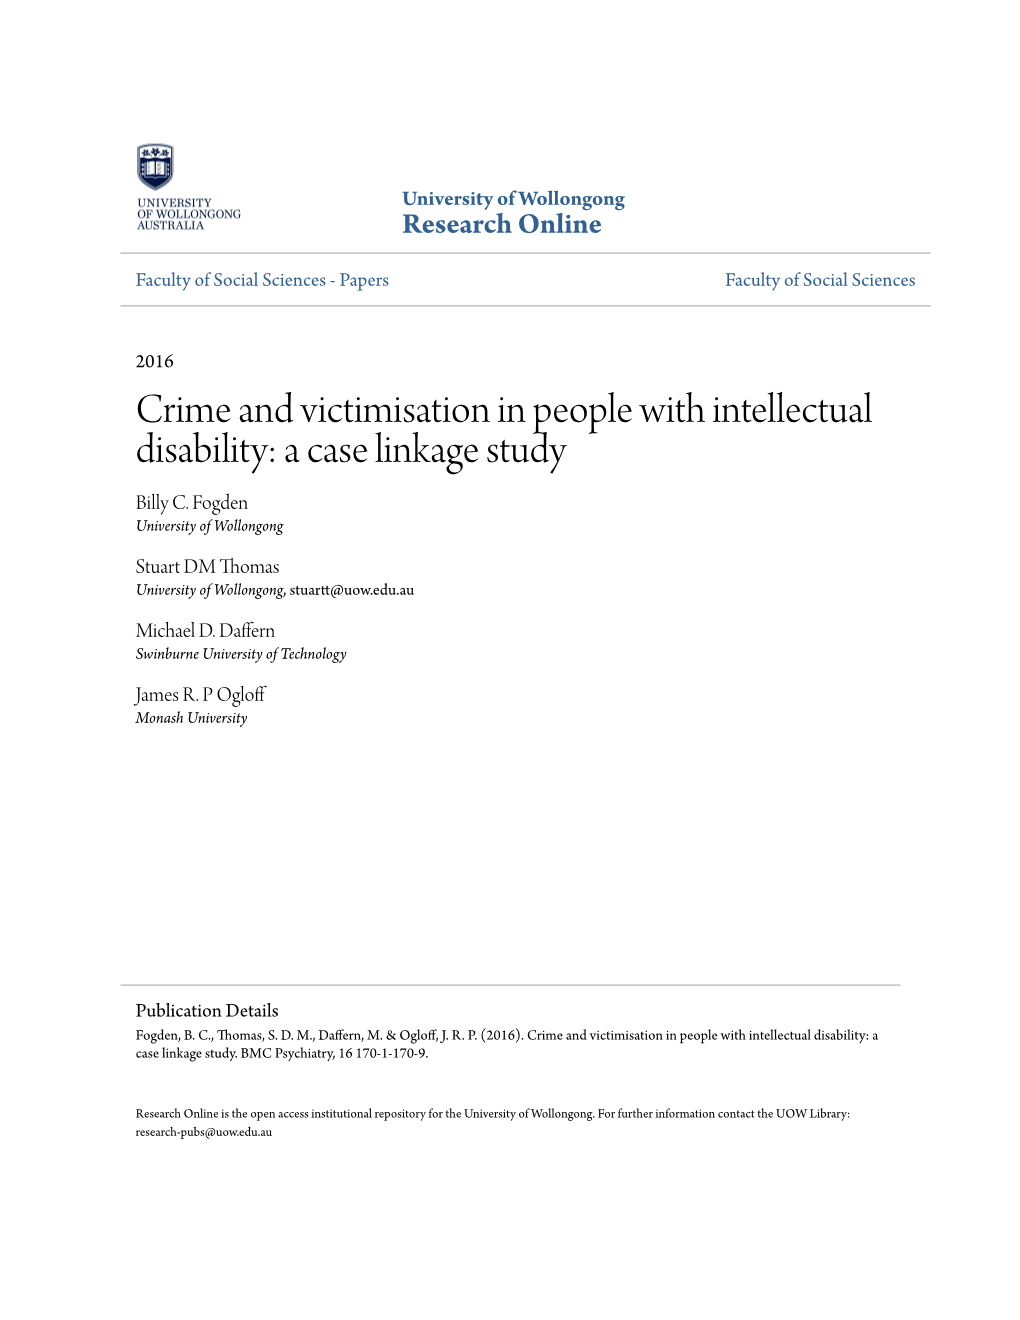 Crime and Victimisation in People with Intellectual Disability: a Case Linkage Study Billy C